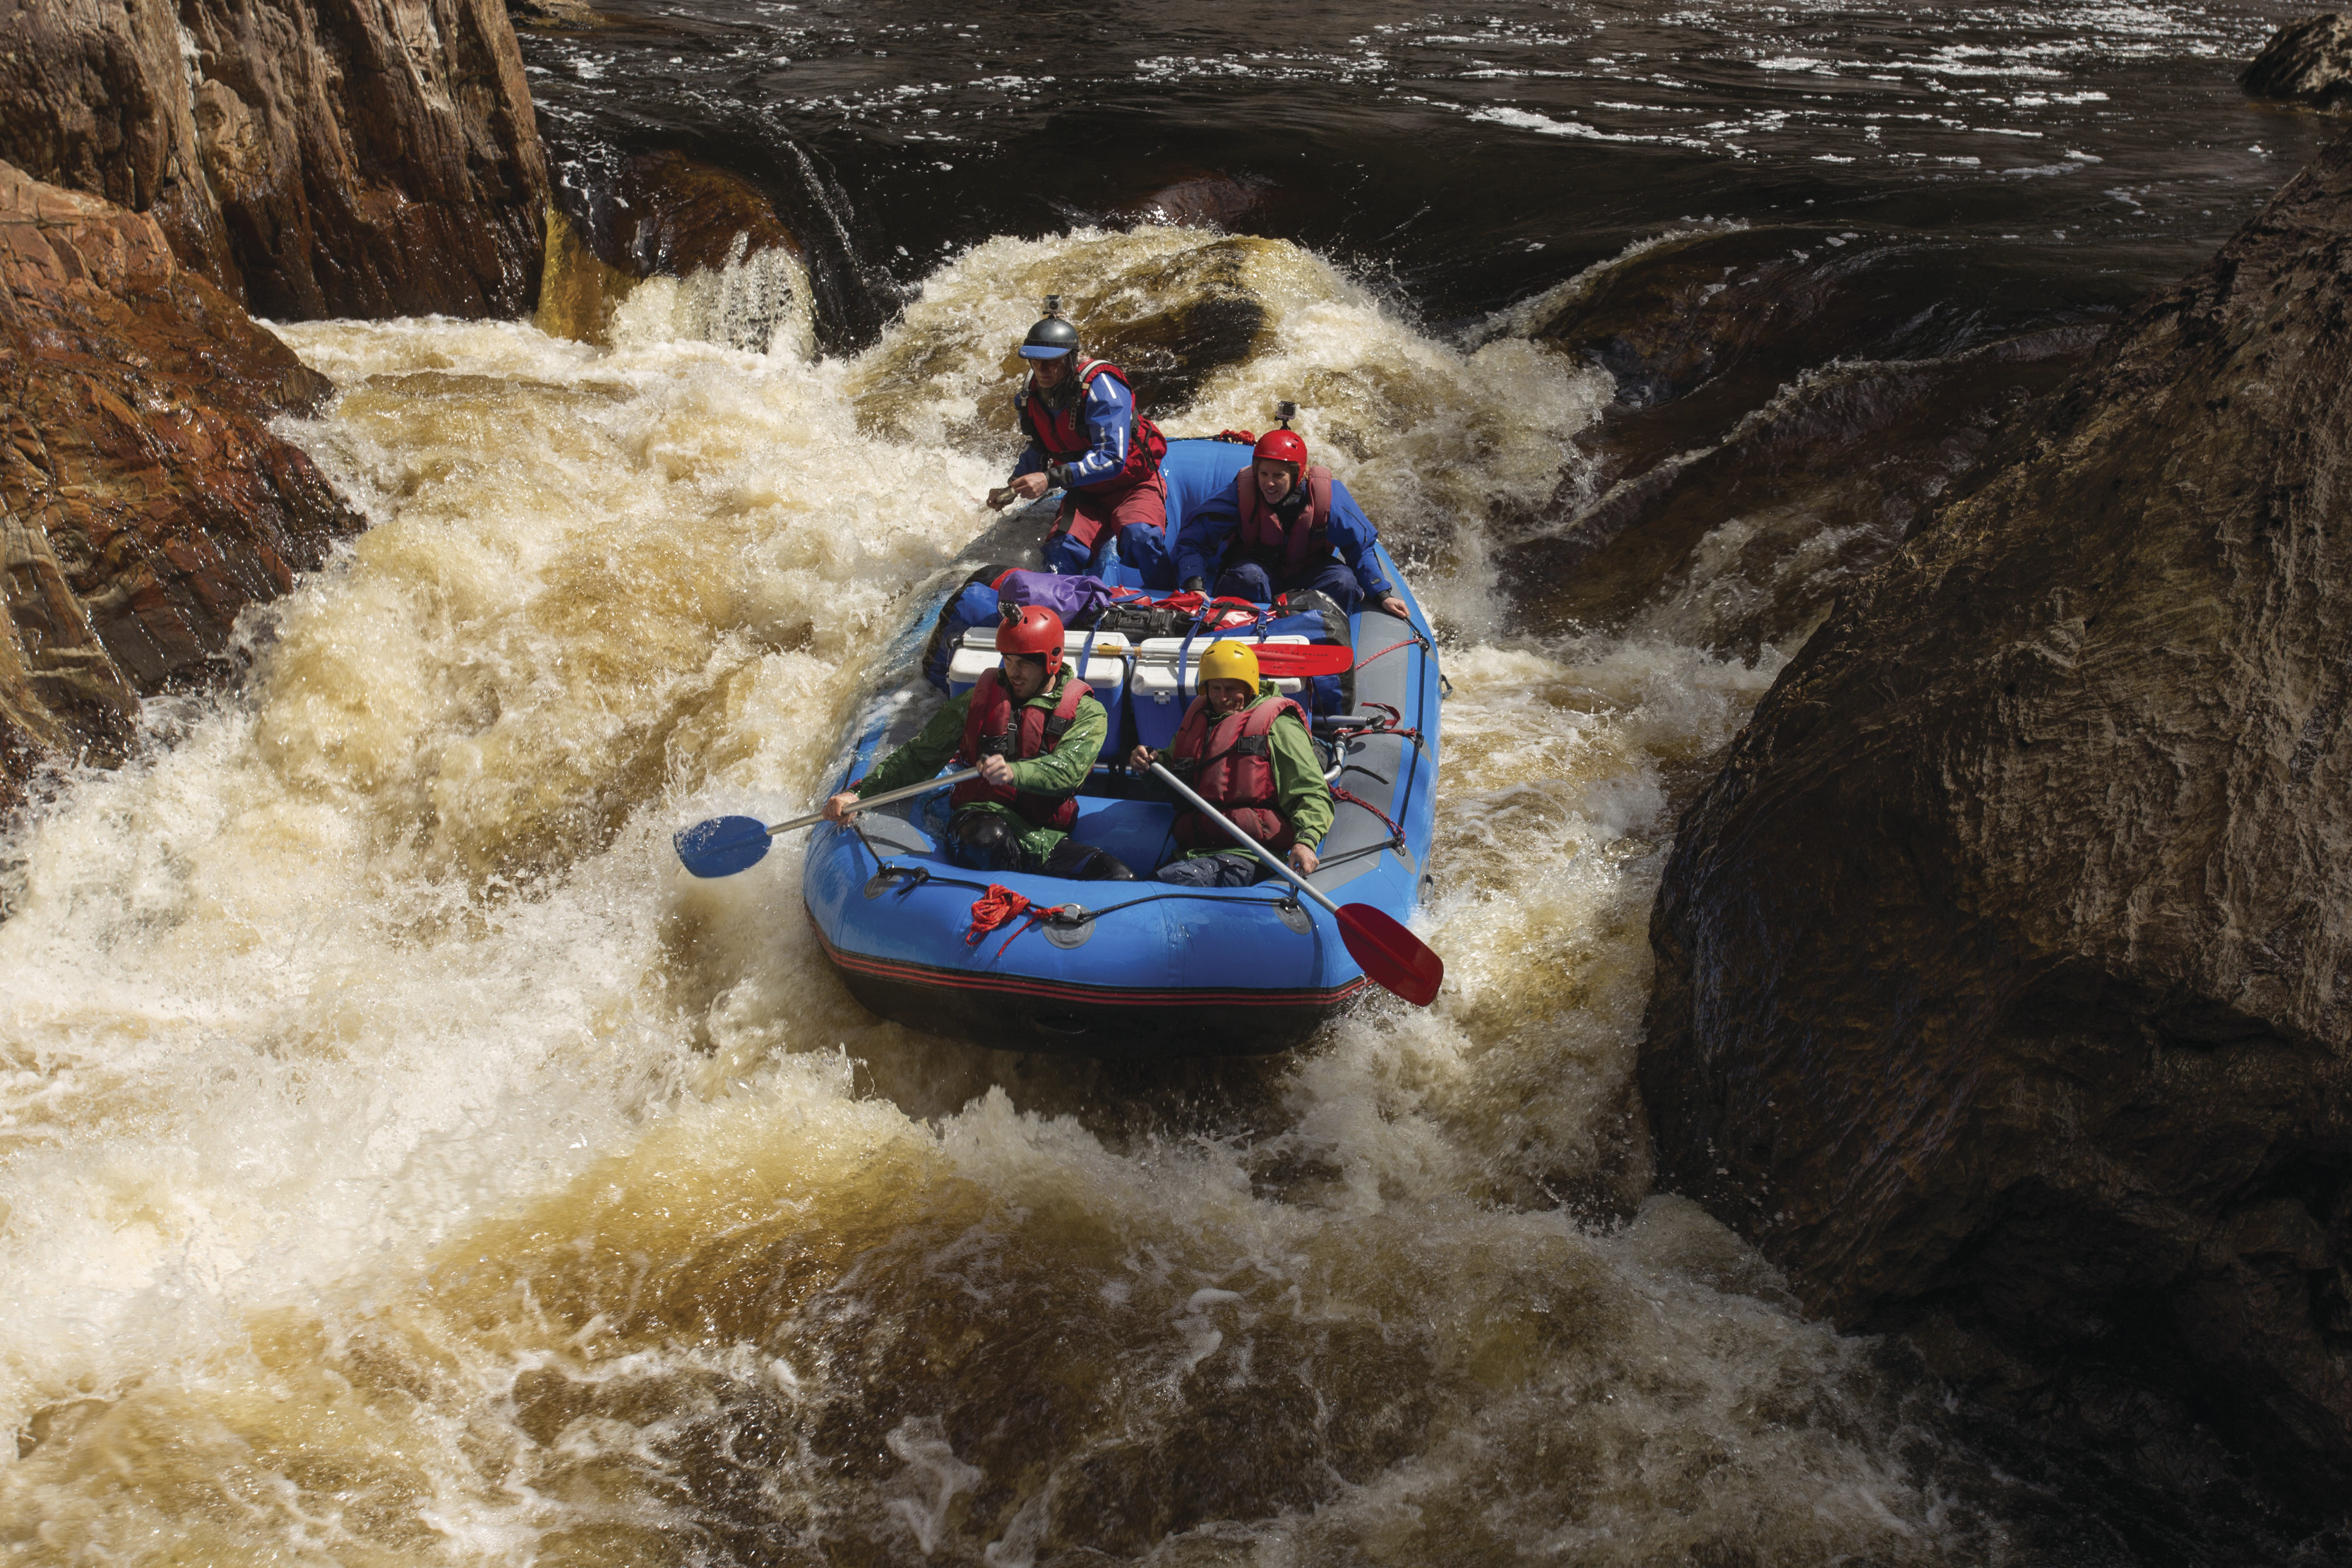 Intense image of four people white water rafting in rough waters on the Franklin River.